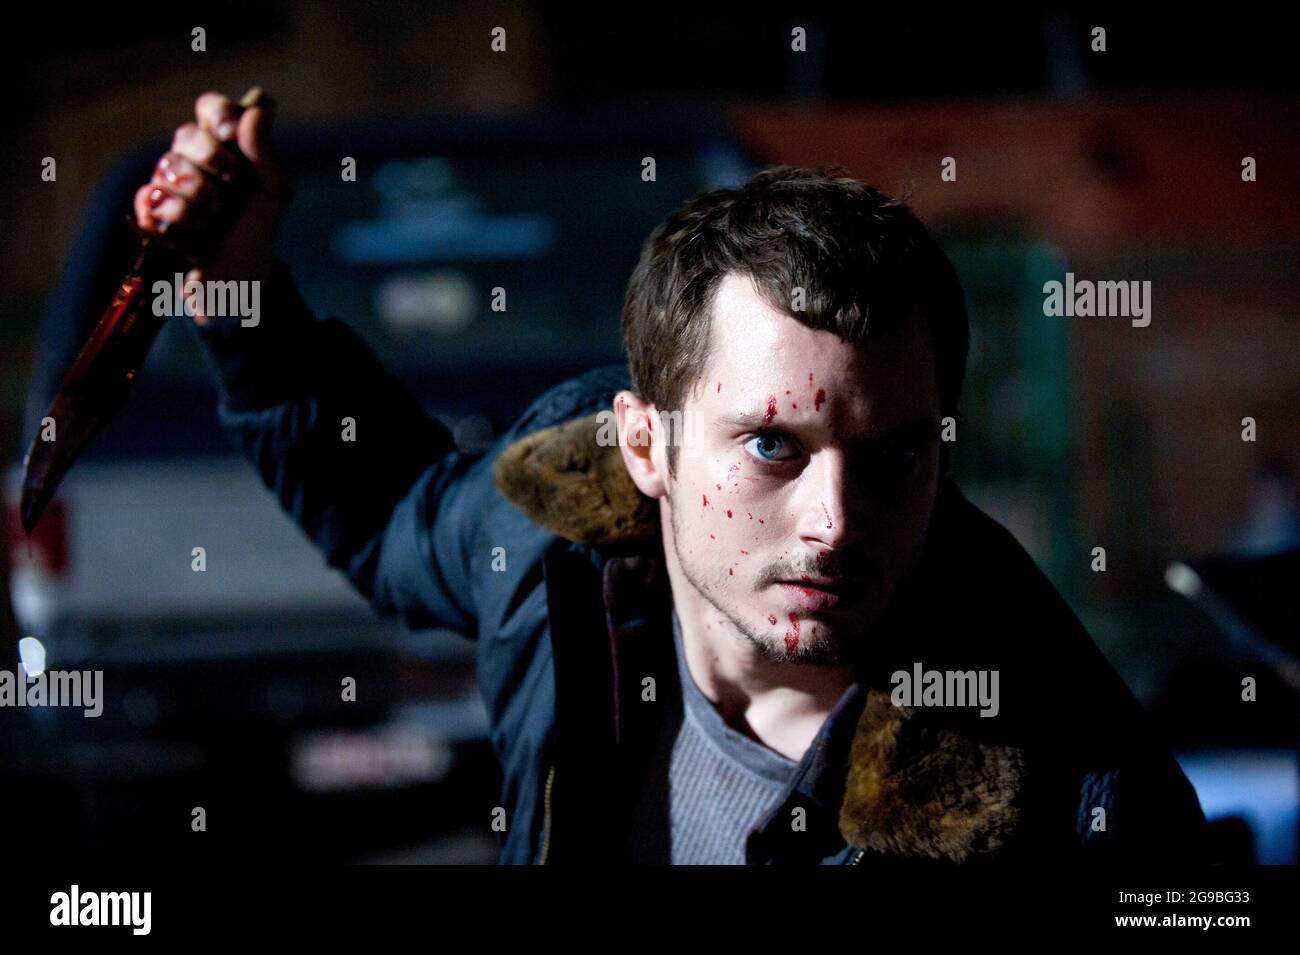 ELIJAH WOOD in MANIAC (2012), directed by FRANCK KHALFOUN. Copyright: Editorial use only. No merchandising or book covers. This is a publicly distributed handout. Access rights only, no license of copyright provided. Only to be reproduced in conjunction with promotion of this film. Credit: La Petite Reine / Canal+ / Album Stock Photo